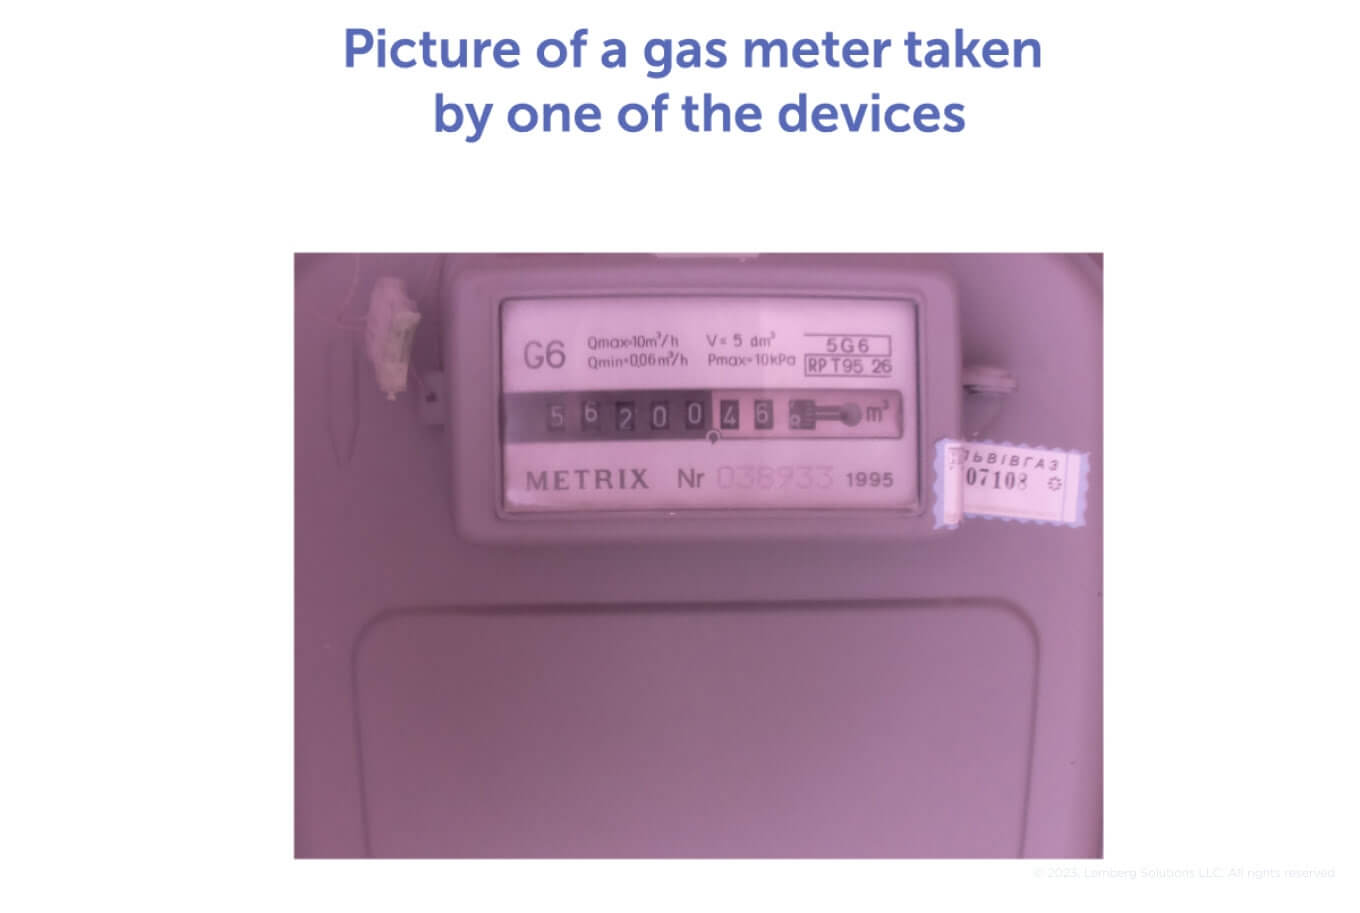 Picture of a gas meter taken by one the device - What Makes LoRaWAN Mesh a Great Smart Home and City Solution? - Lemberg Solutions.jpg